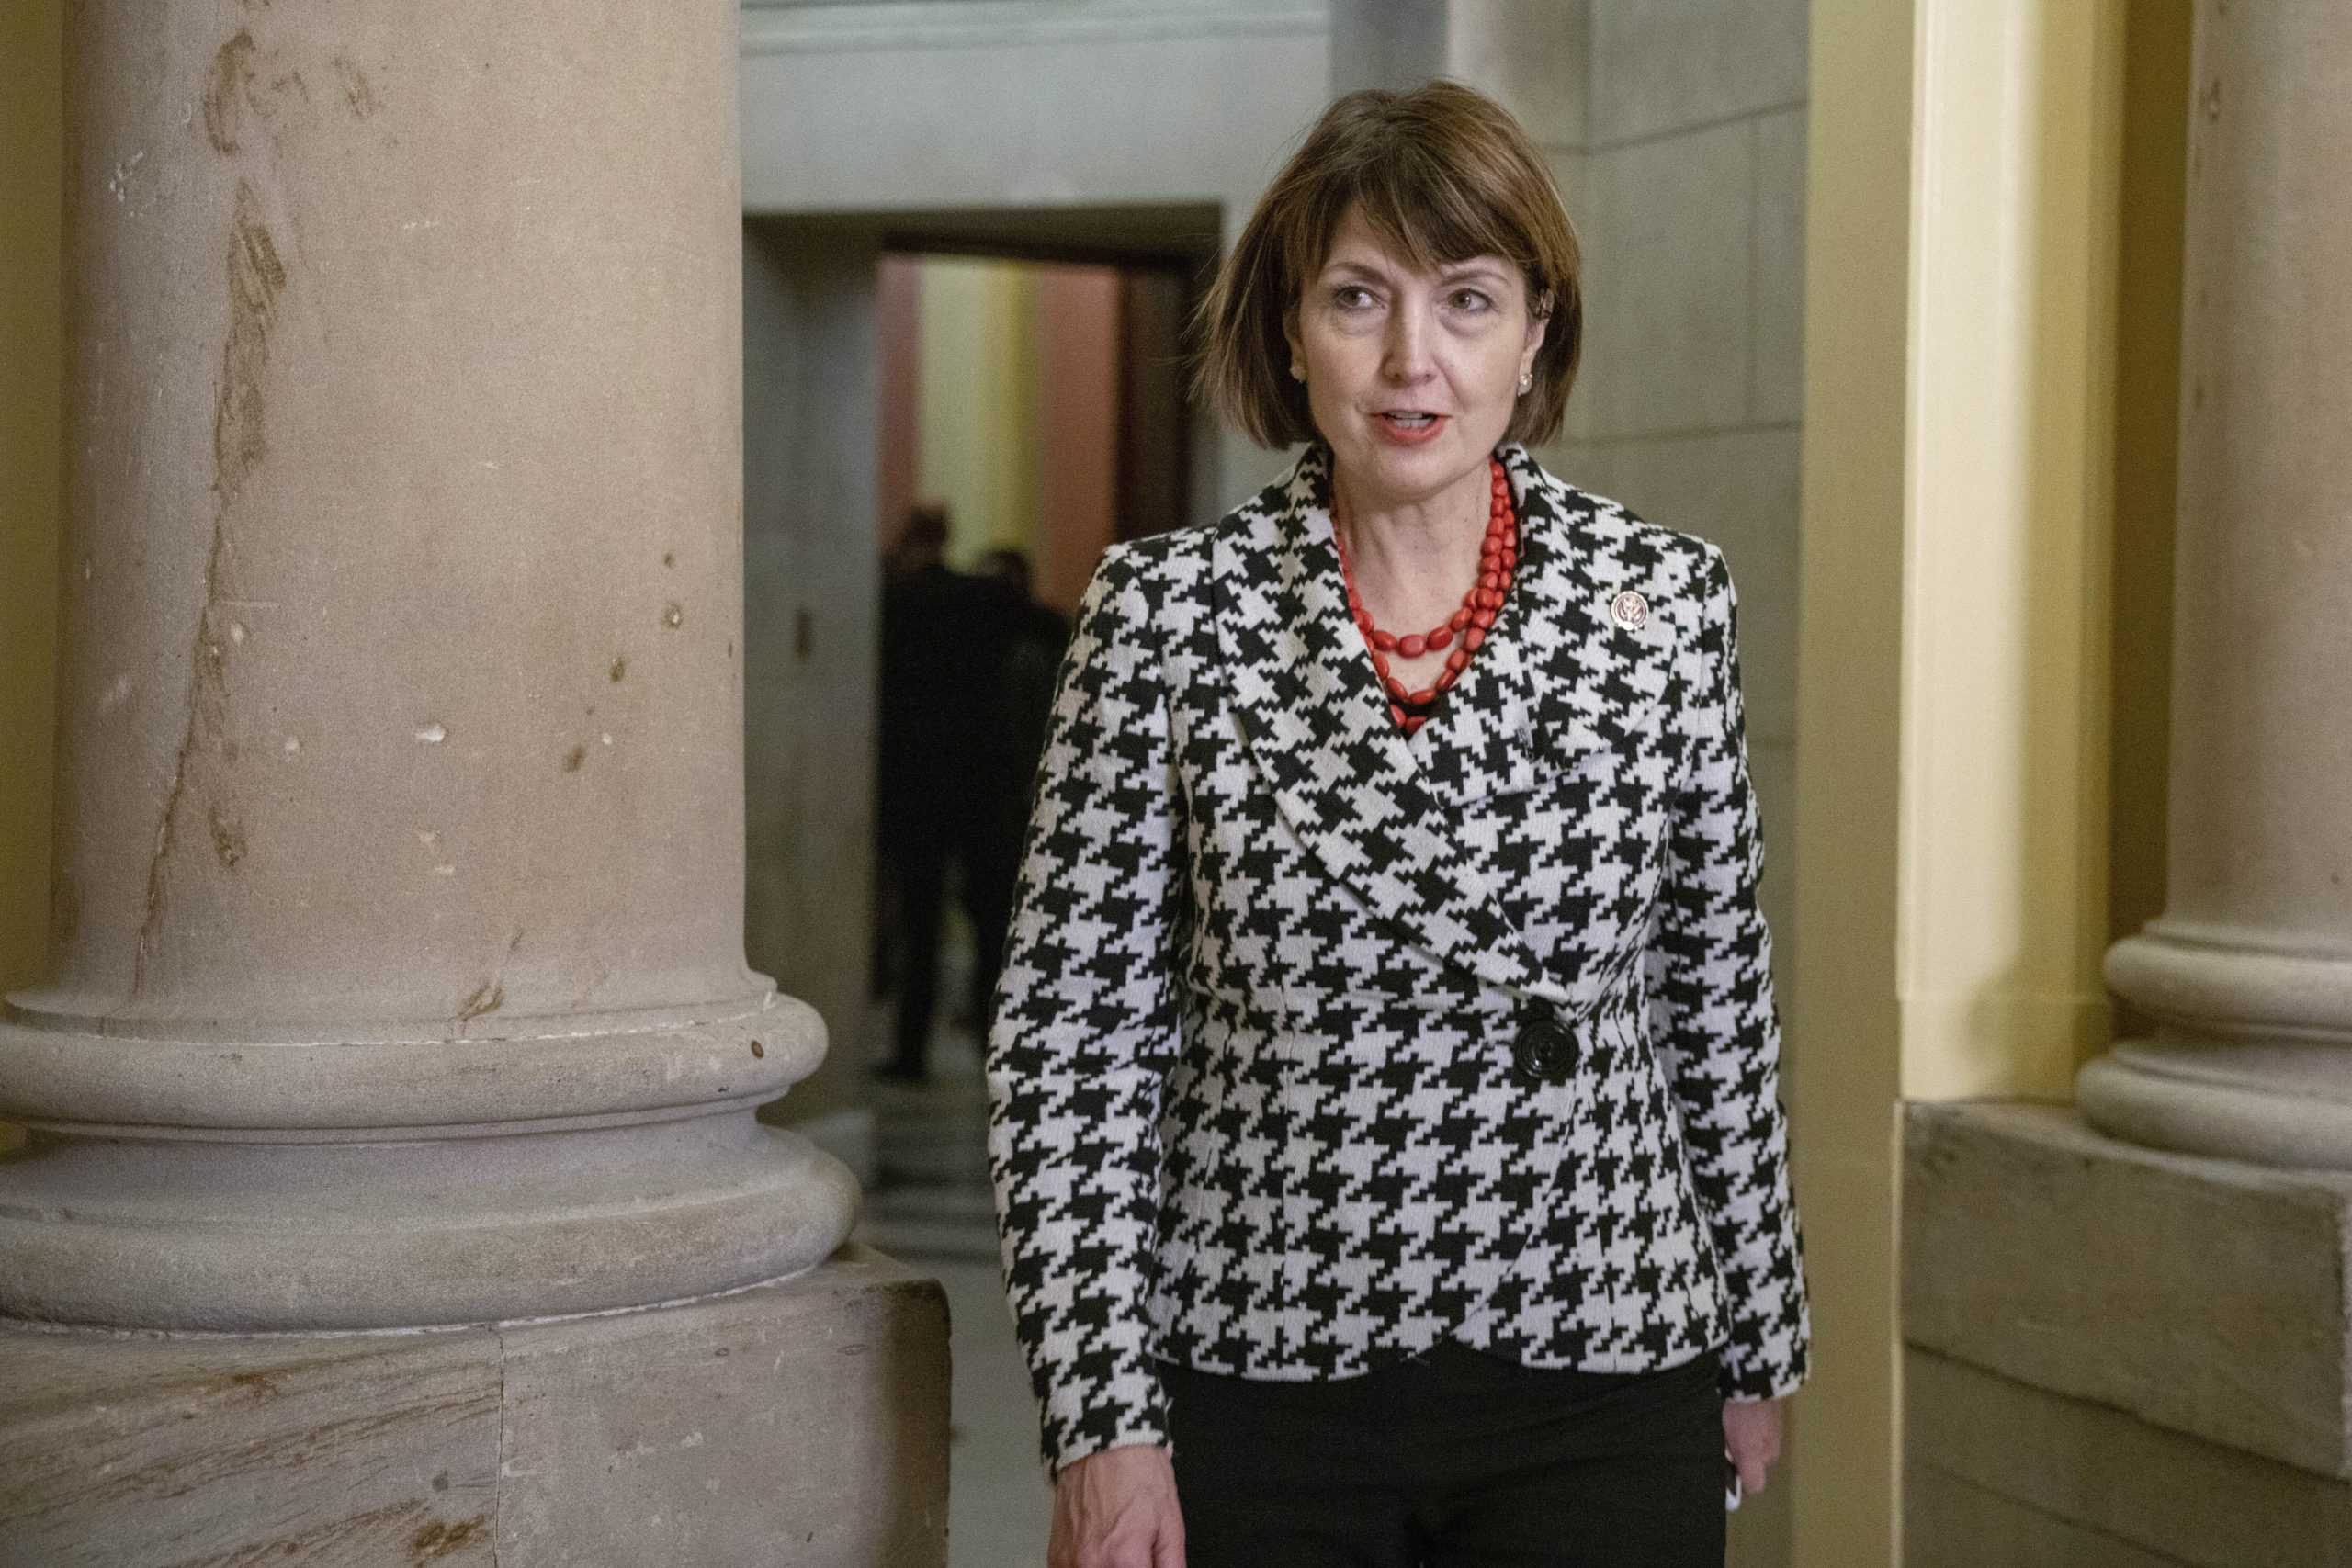 GOP Rep. Cathy McMorris Rodgers leaves the speaker of the house's office to walk to the House chamber on Friday to attend the 14th vote for speaker of the House, on Capitol Hill in Washington., D.C.